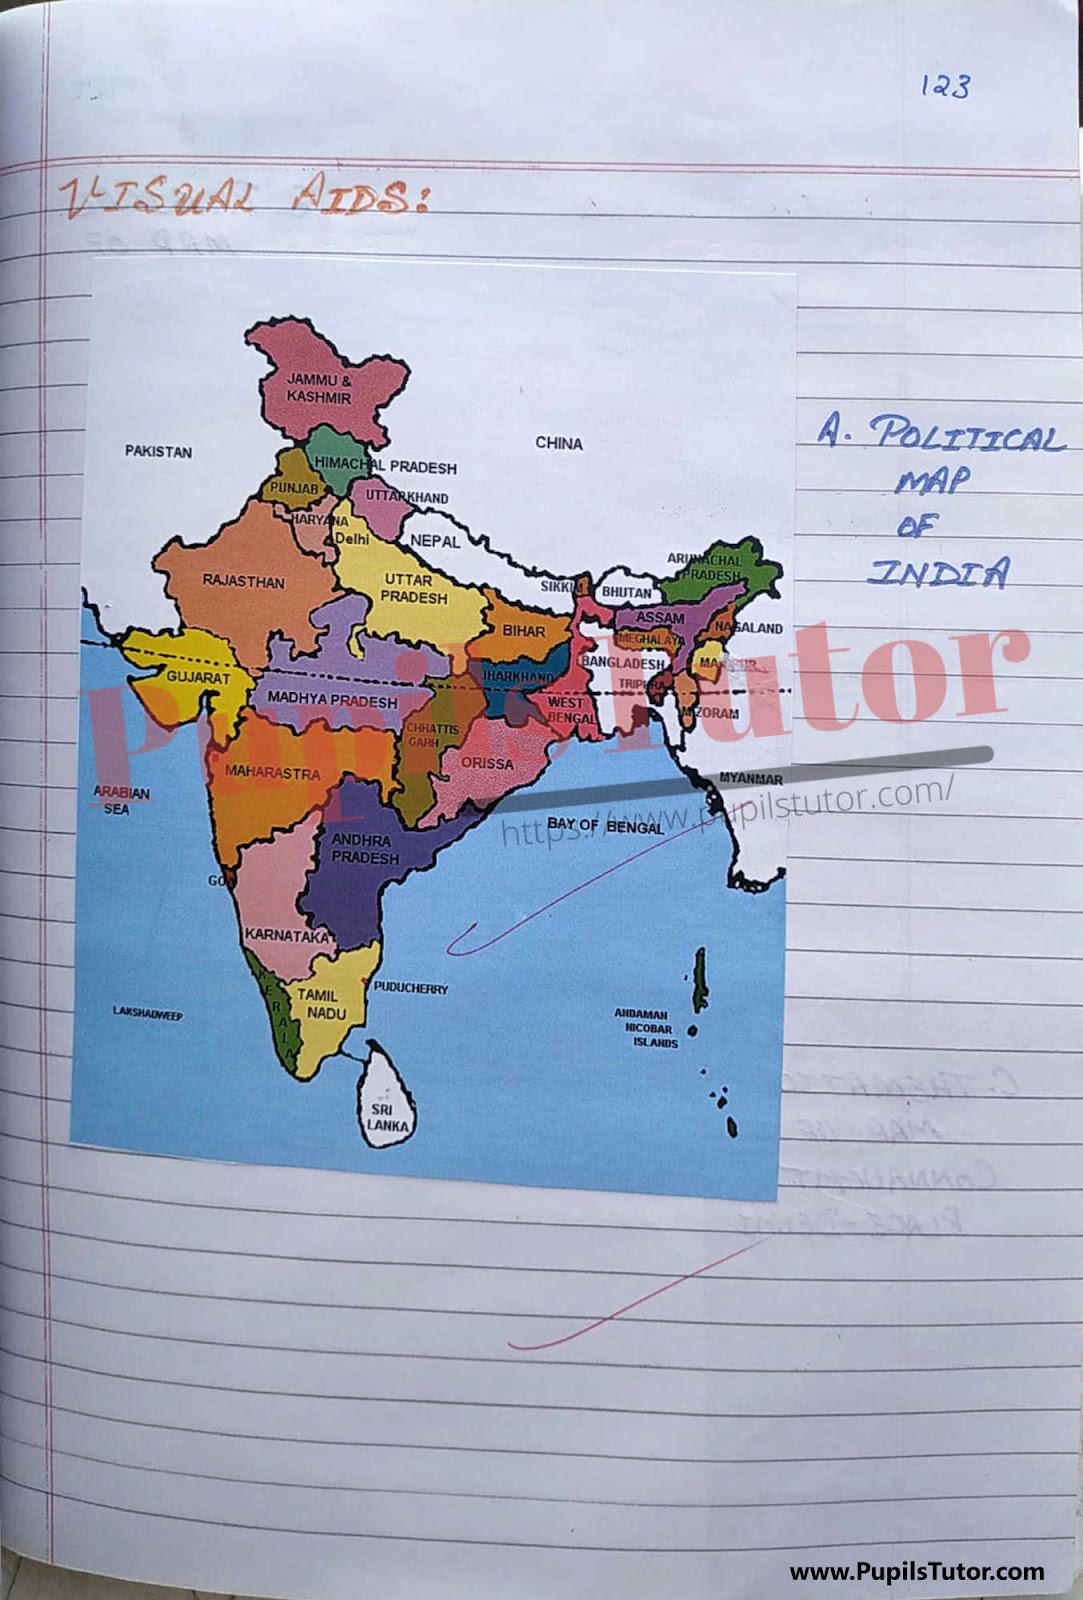 How To Make Macro Teaching Map Lesson Plan For Geography Subject In English [Page And Image Number 7] – www.pupilstutor.com